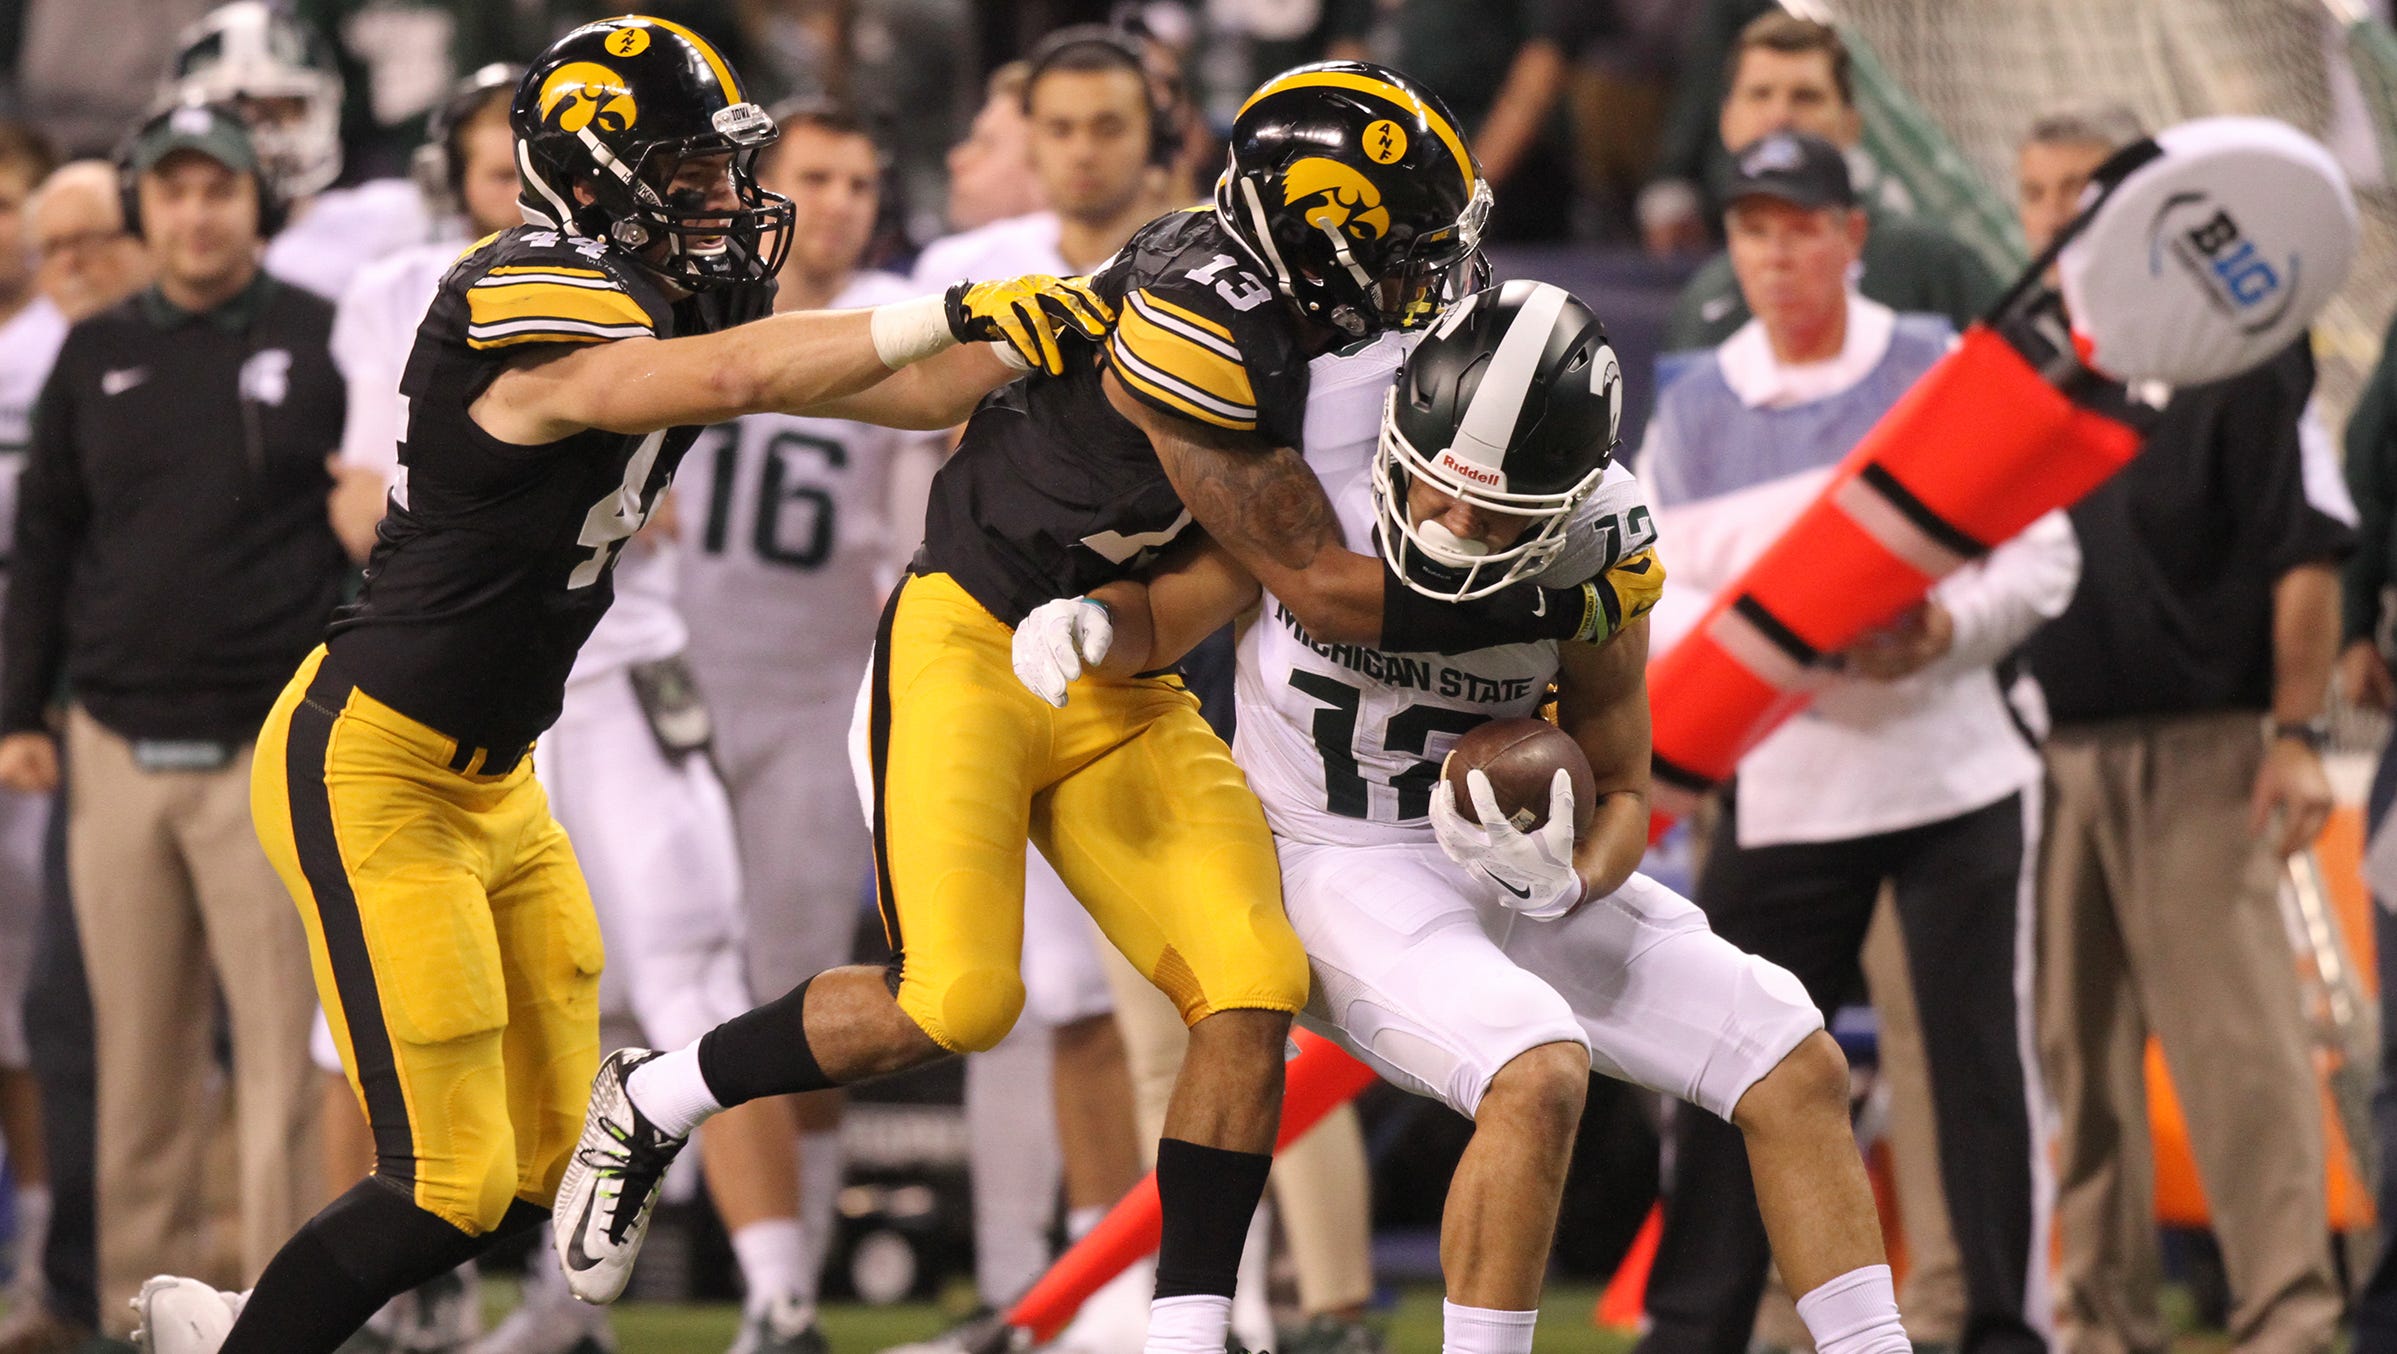 Iowa's Greg Mabin tackles Michigan State's R.J. Shelton during the Big Ten Championship game at Lucas Oil Stadium in Indianapolis, Ind. on Saturday, Dec. 5, 2015.